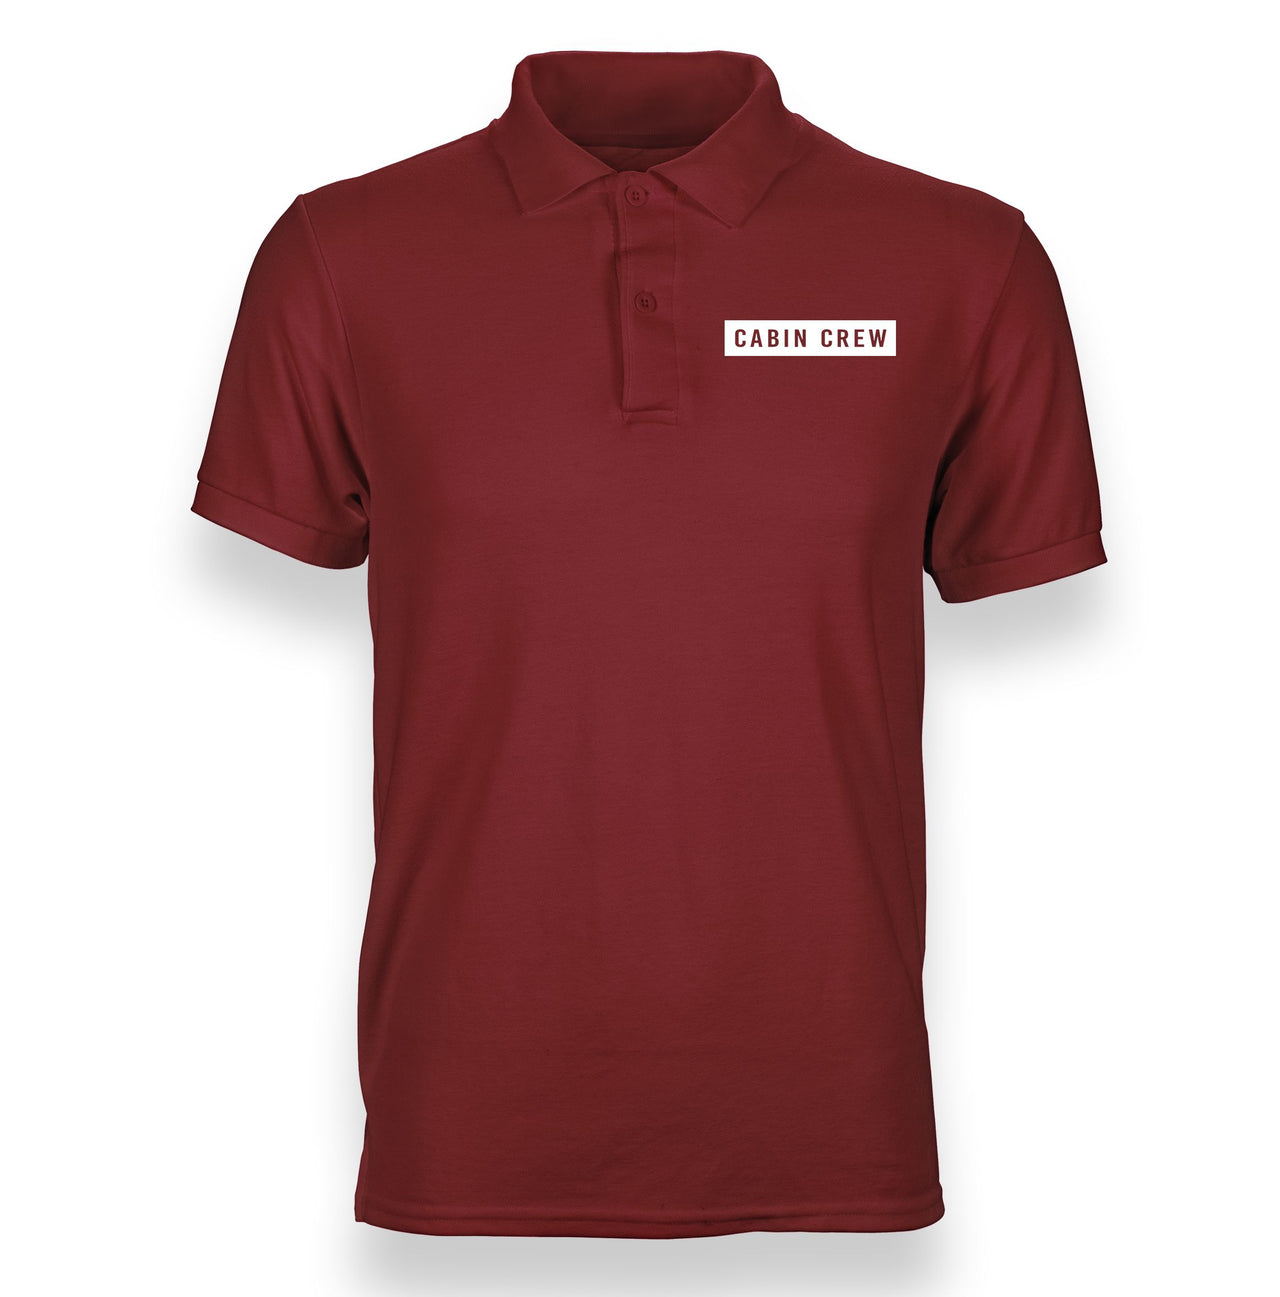 Cabin Crew Text Designed Polo T-Shirts